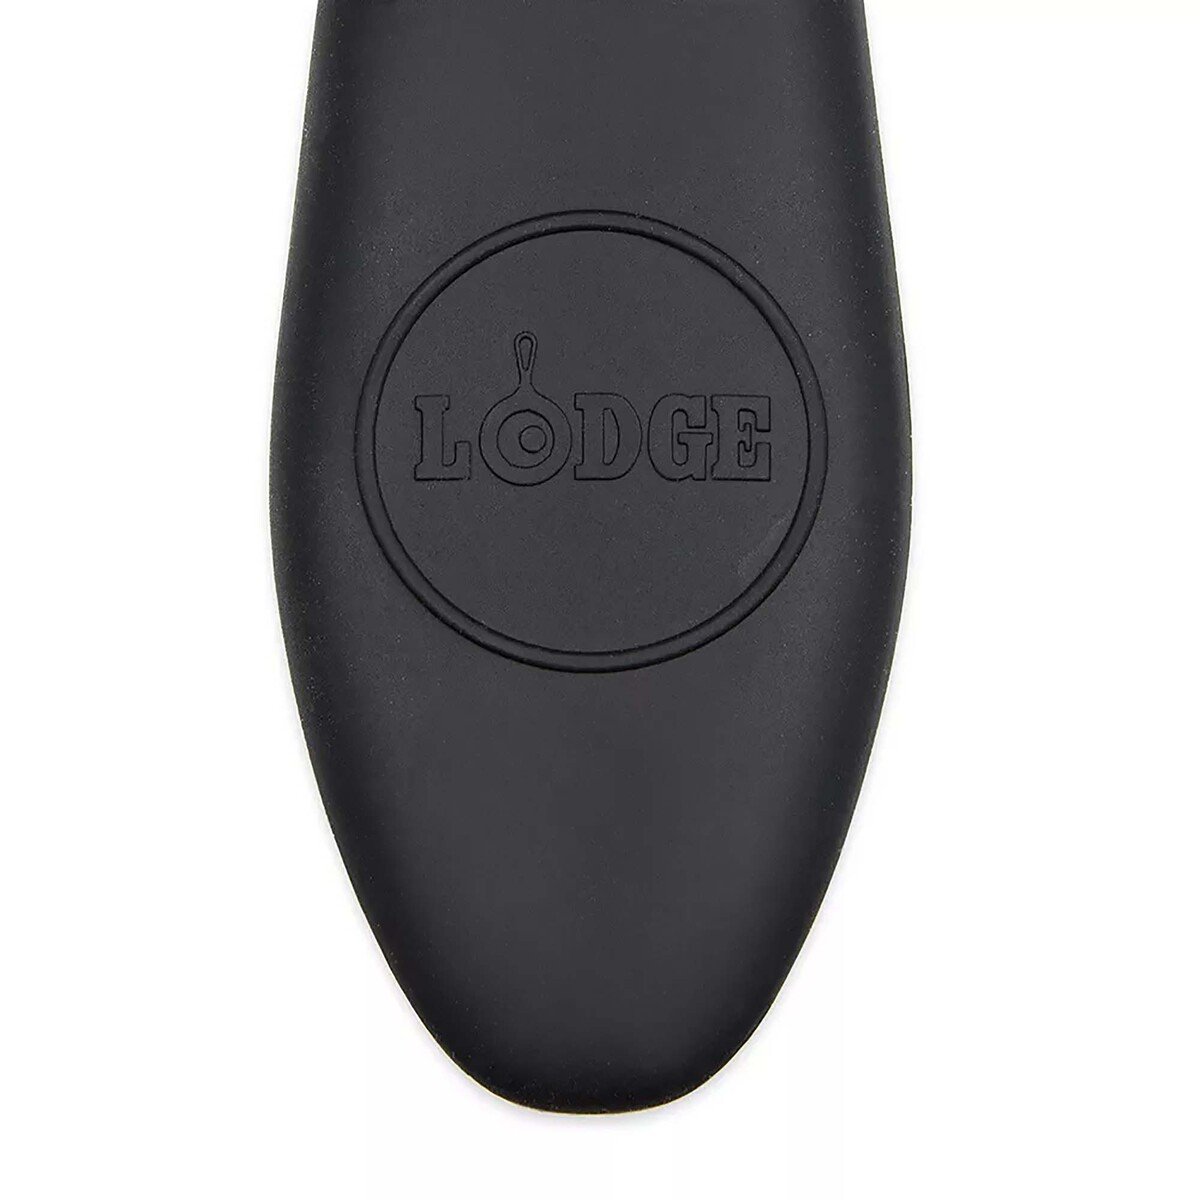 Lodge Silicon Hot Handle Holder Cover / Gloves ASHH11